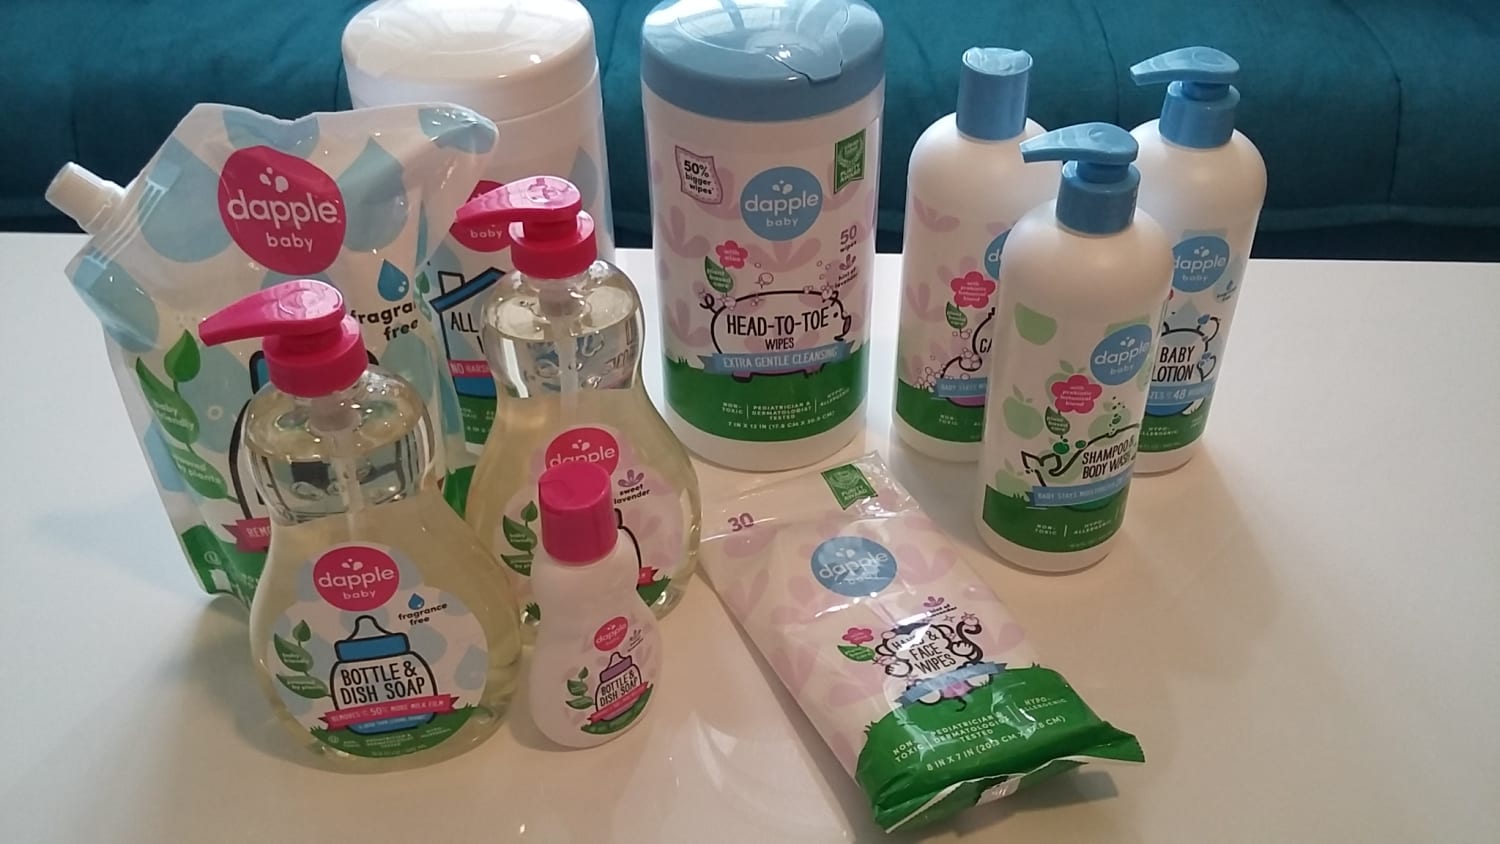 Dapple Baby Plant-Based Household and Personal Care Products